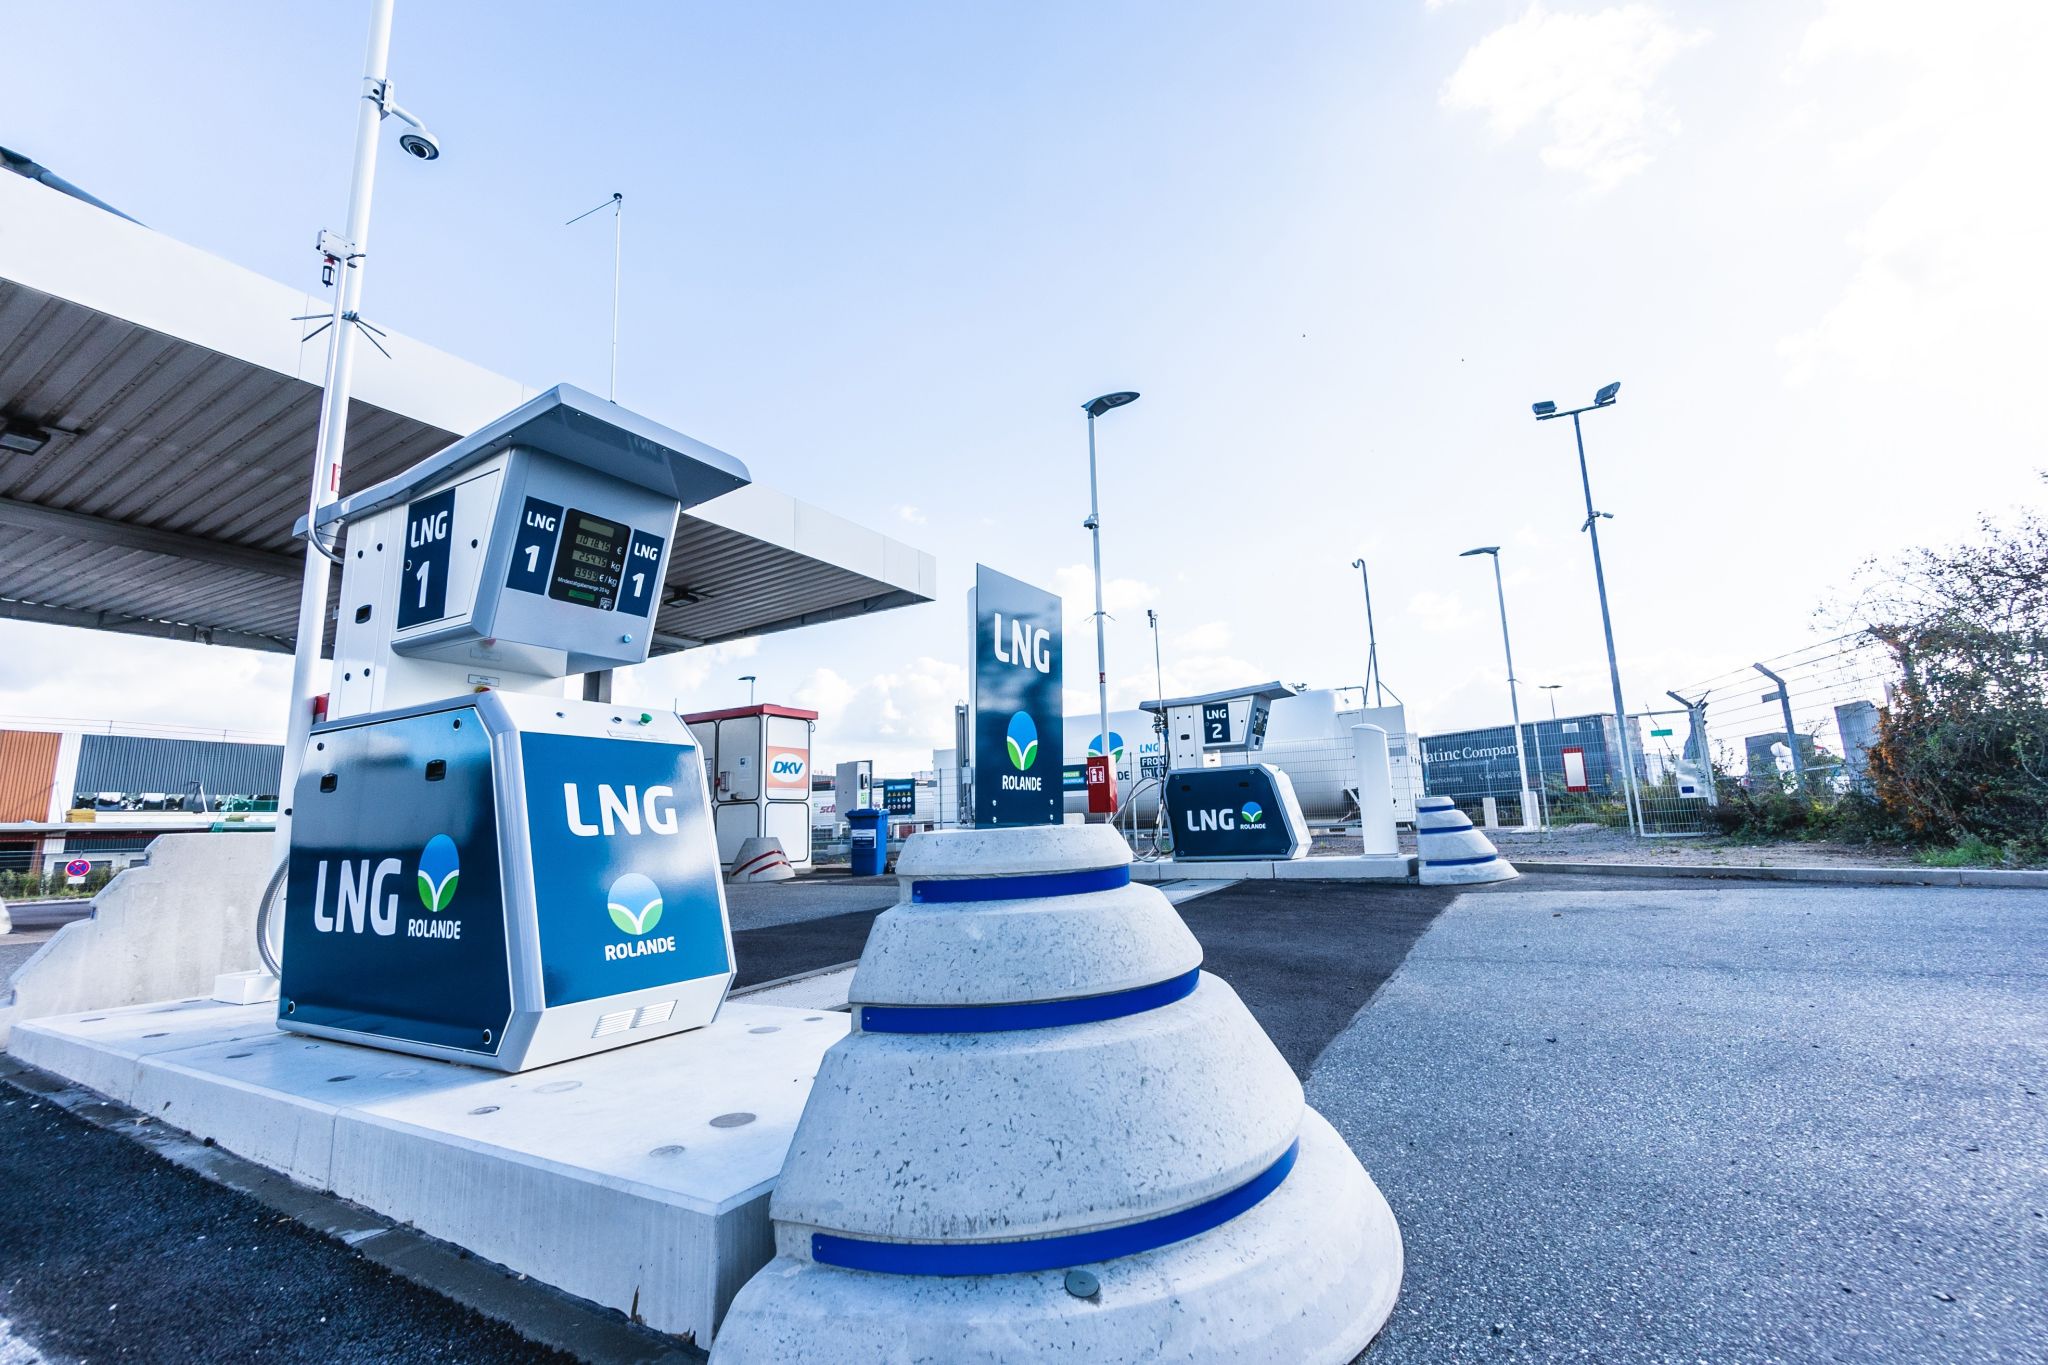 Rolande adds another German LNG fueling station to its network